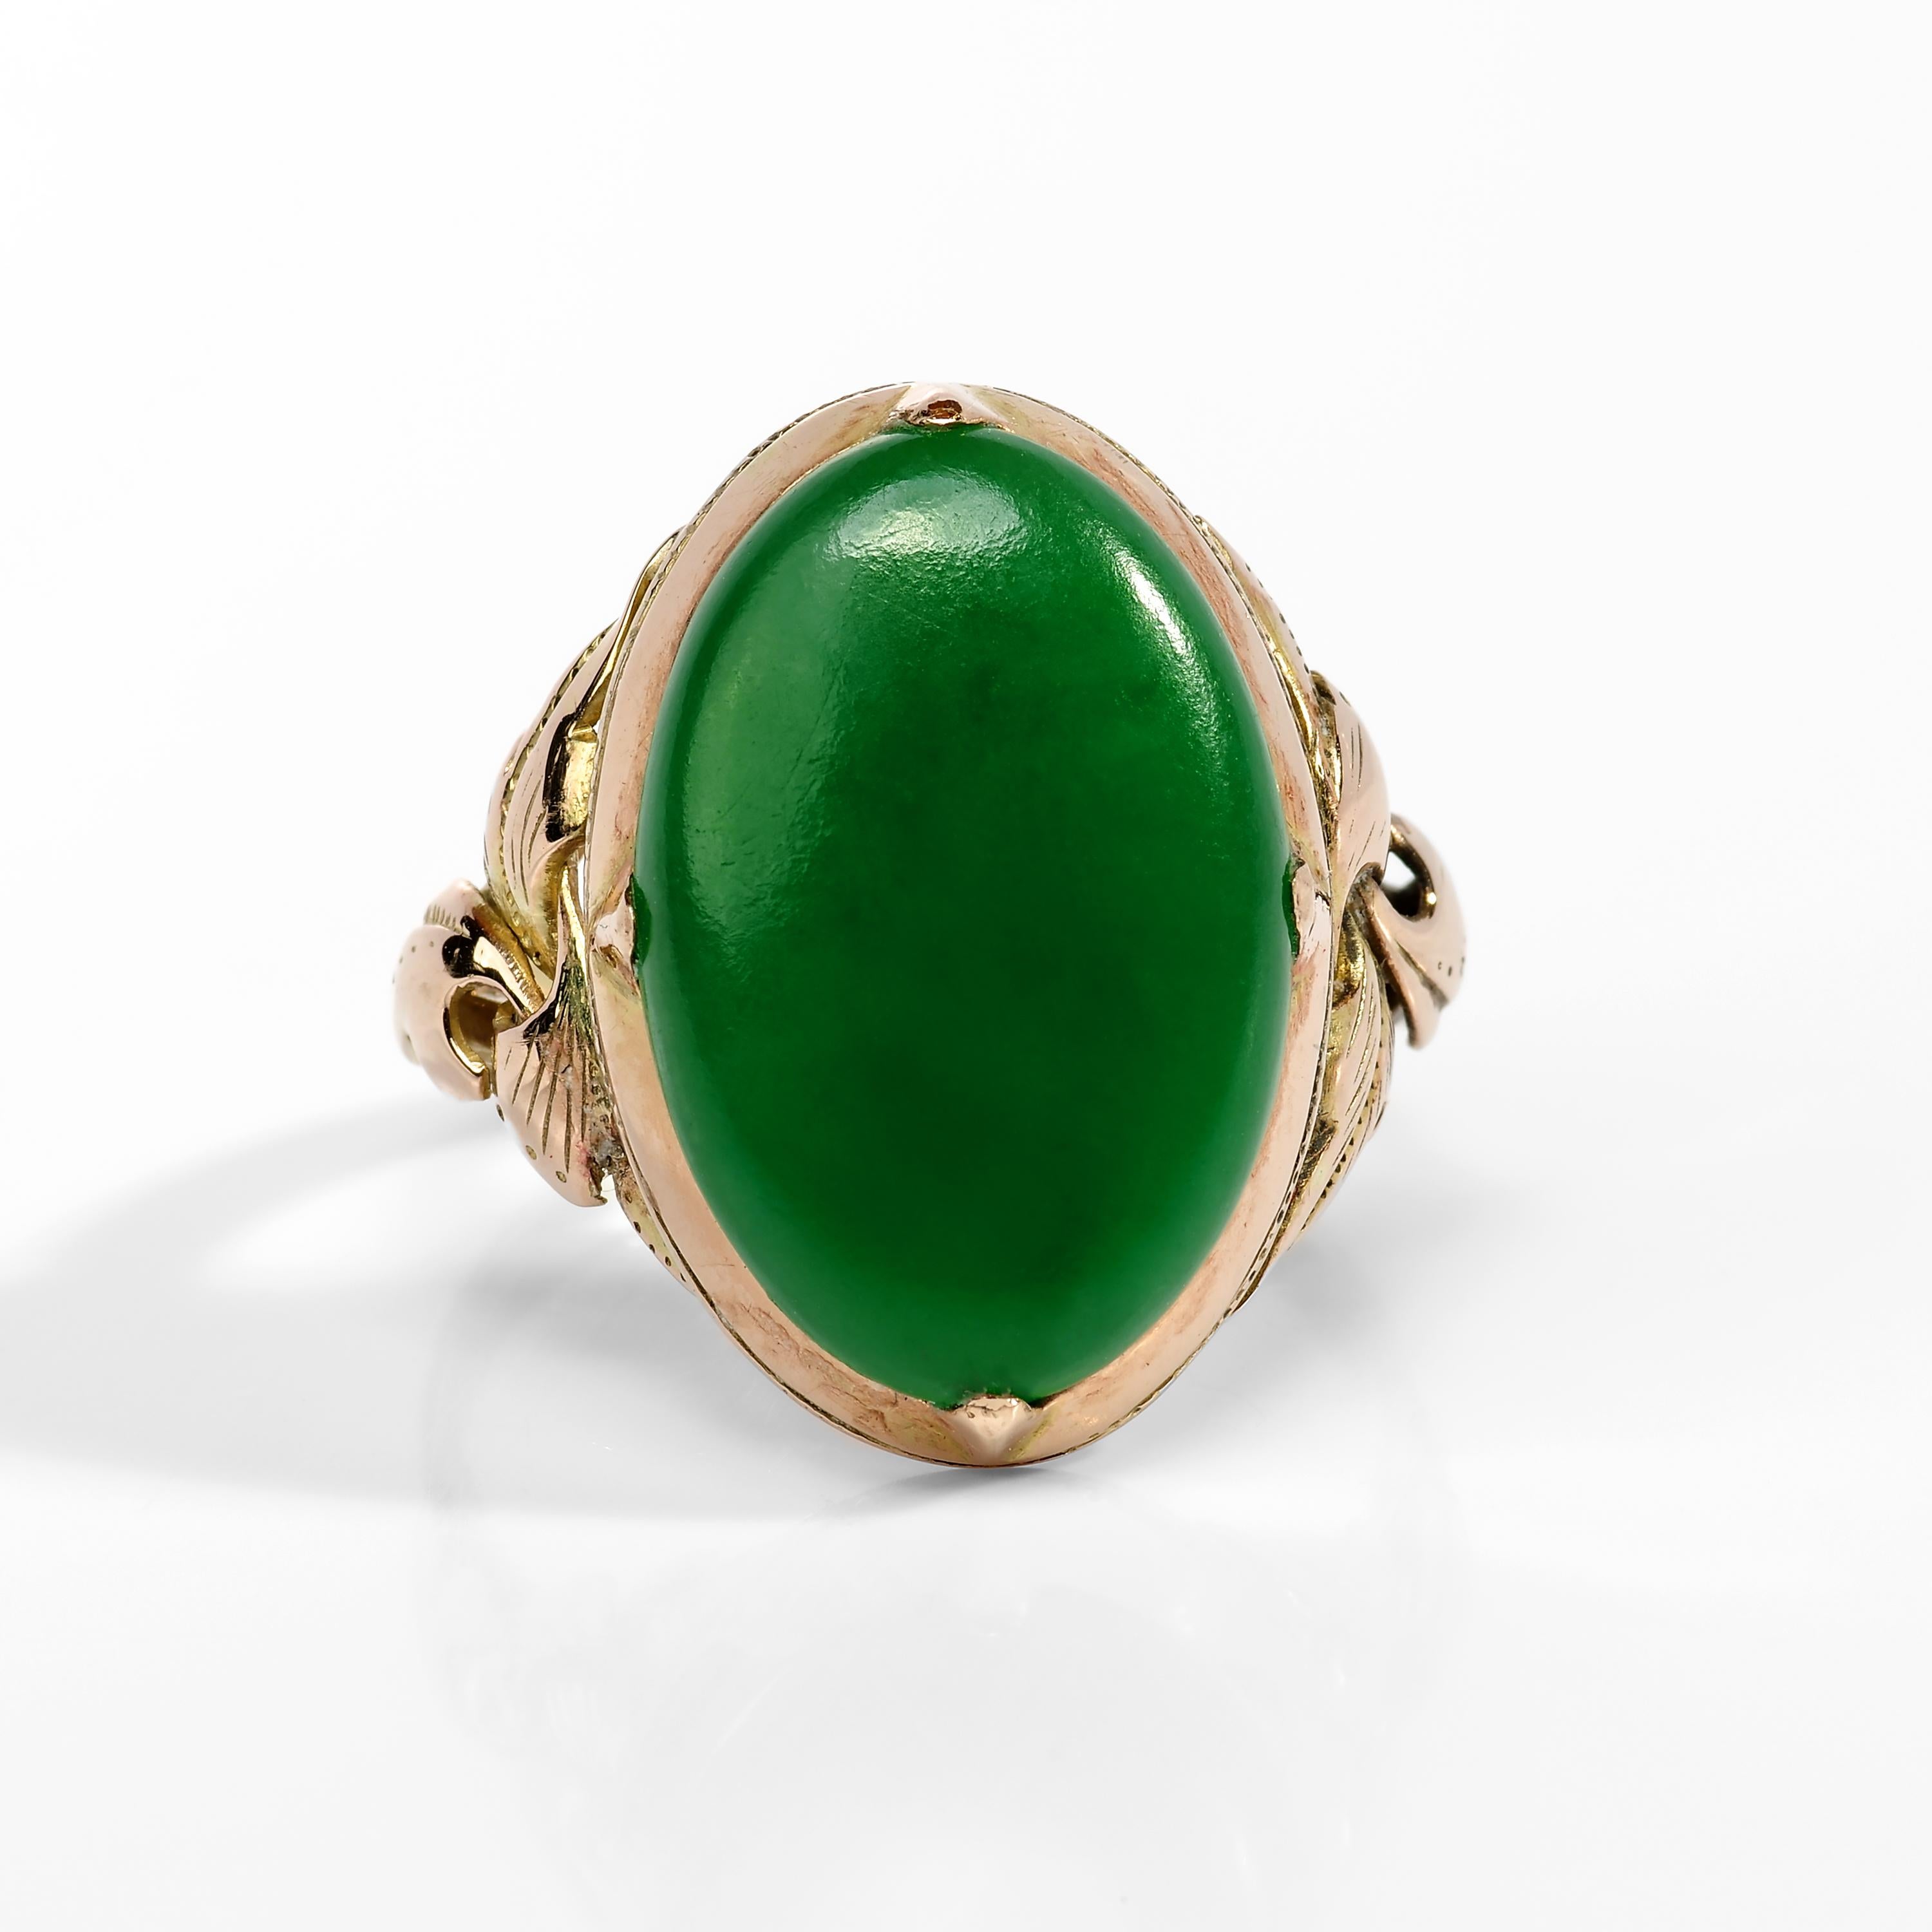 The lush emerald-green jade cabochon set into this hand-fabricated 18K yellow gold mounting is so evenly toned, so vibrant, and so fine that when I first saw the ring I instantly dismissed it as an imposter. 